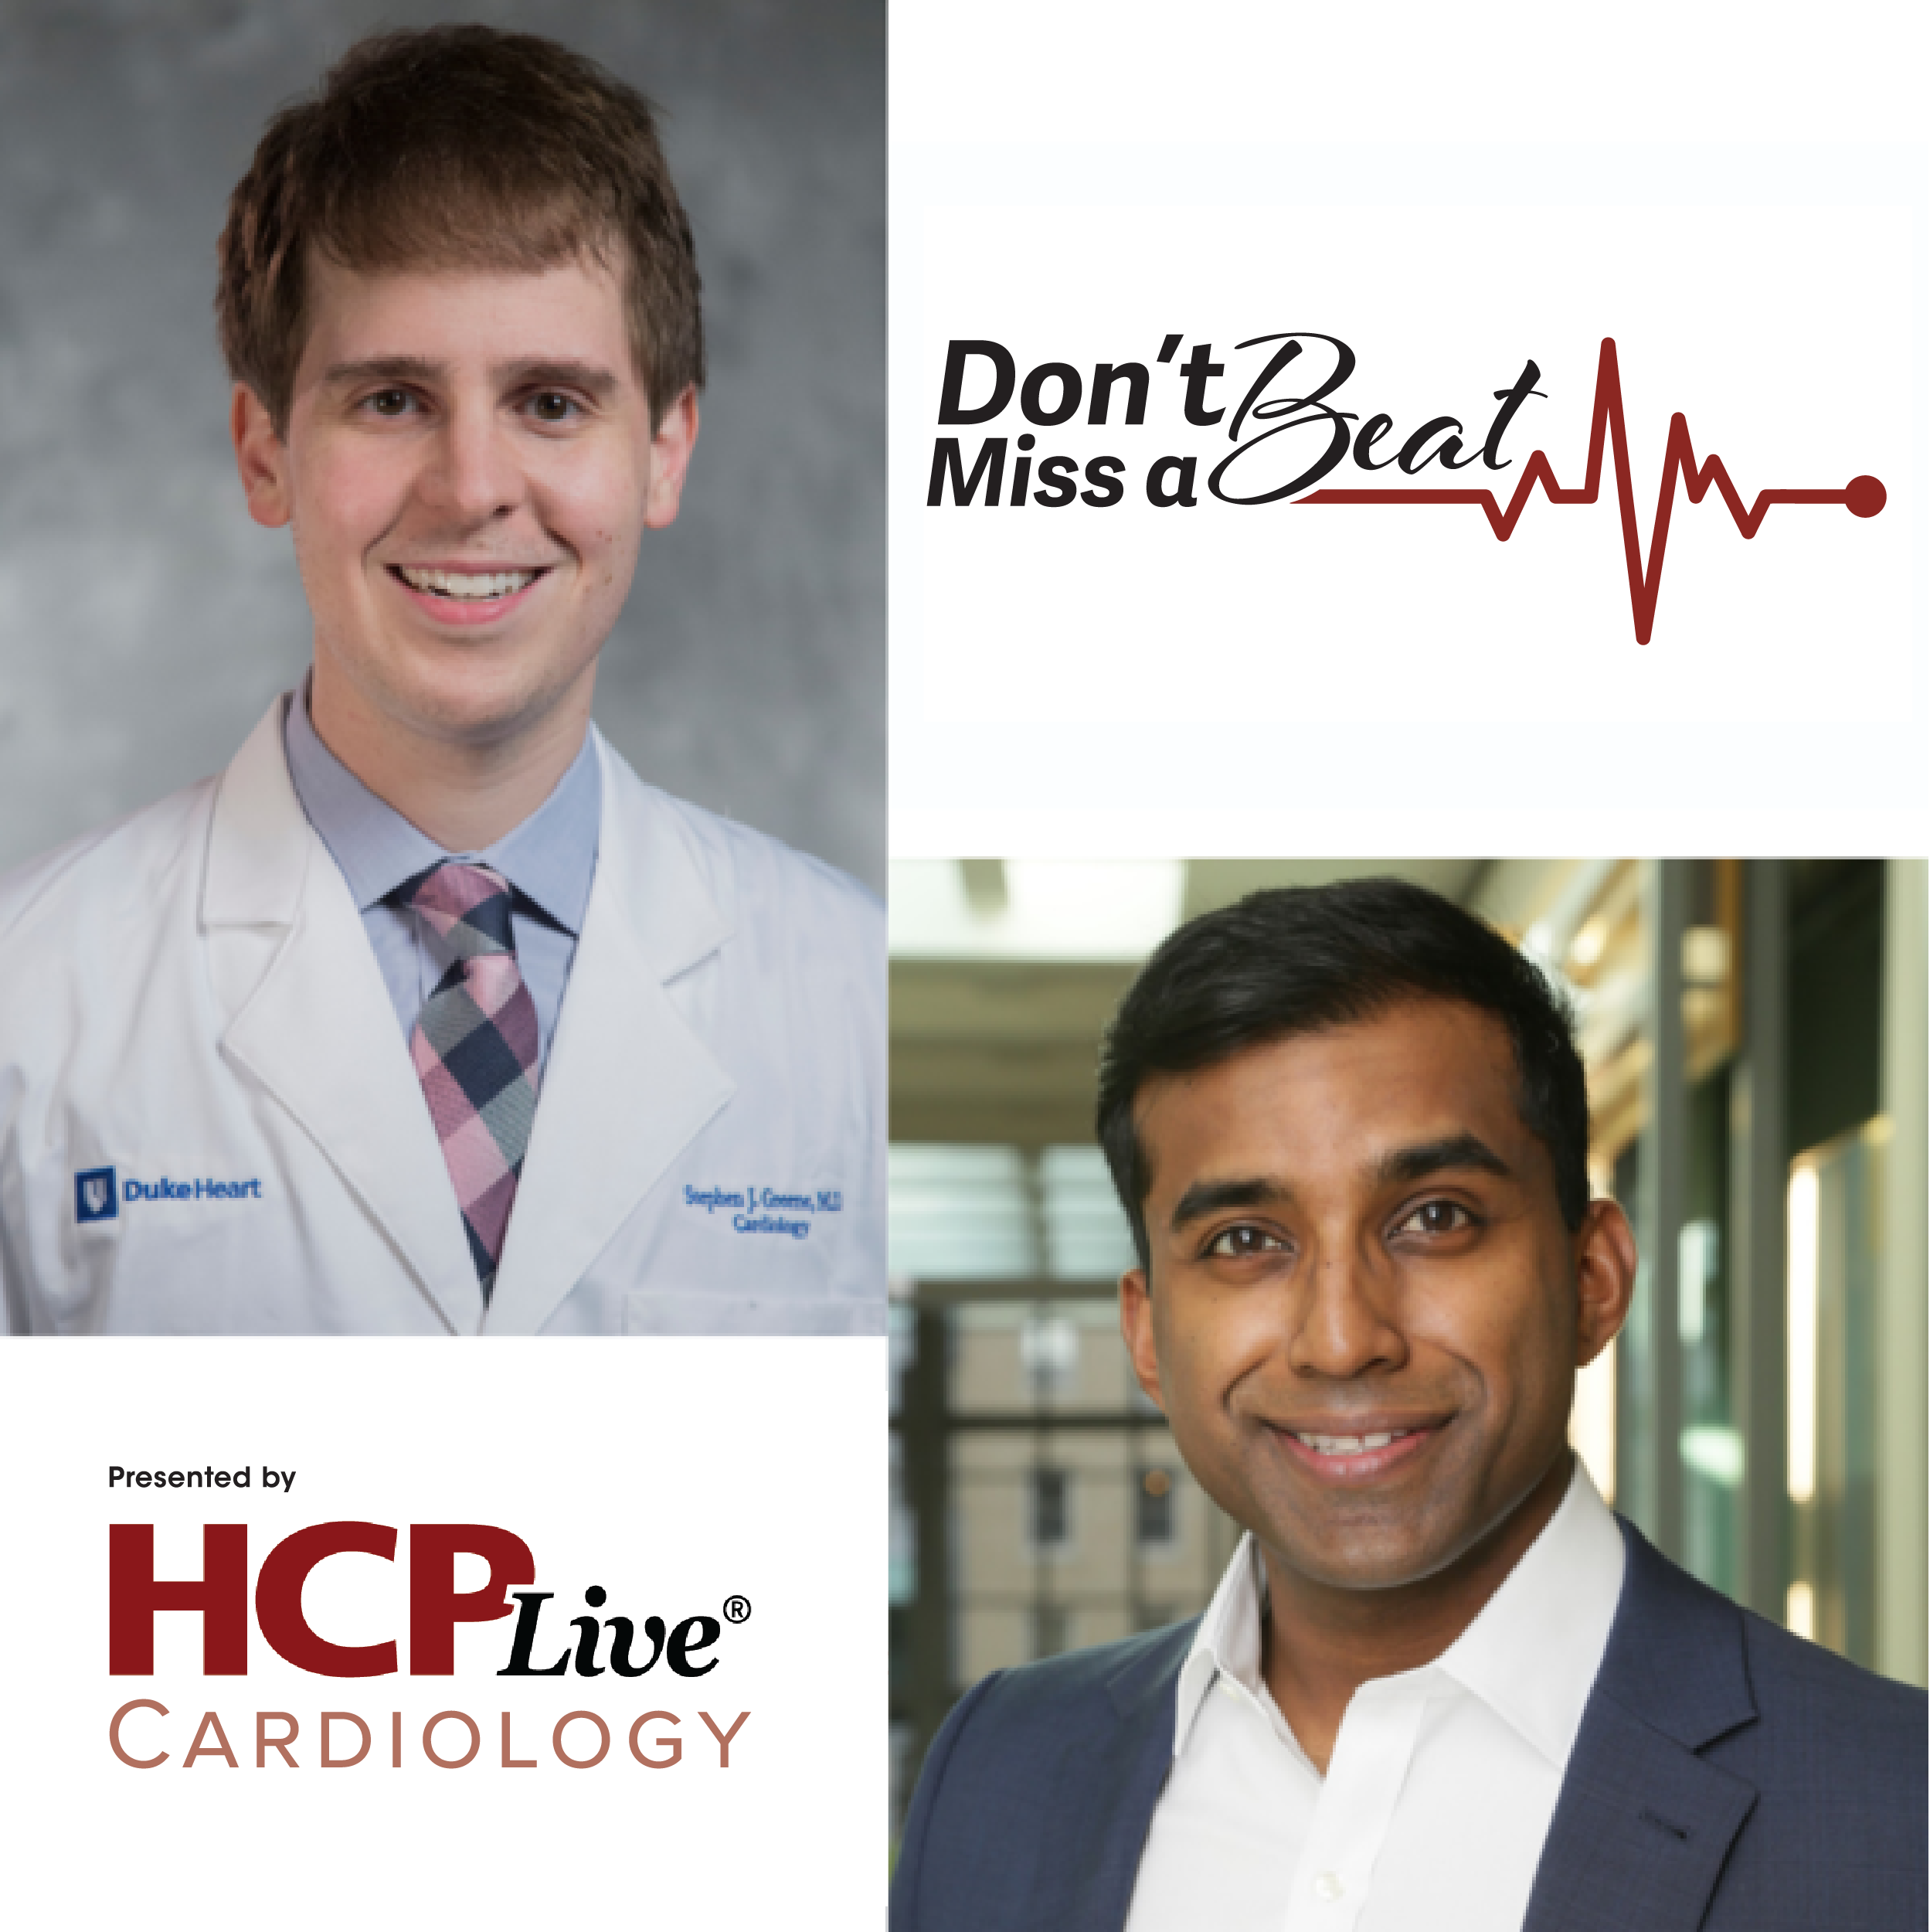 Don't MMiss a Beat podcast thumbnail featuring podcast logo and hosts: Muthiah Vaduganathan, MD, and Stephen Greene, MD